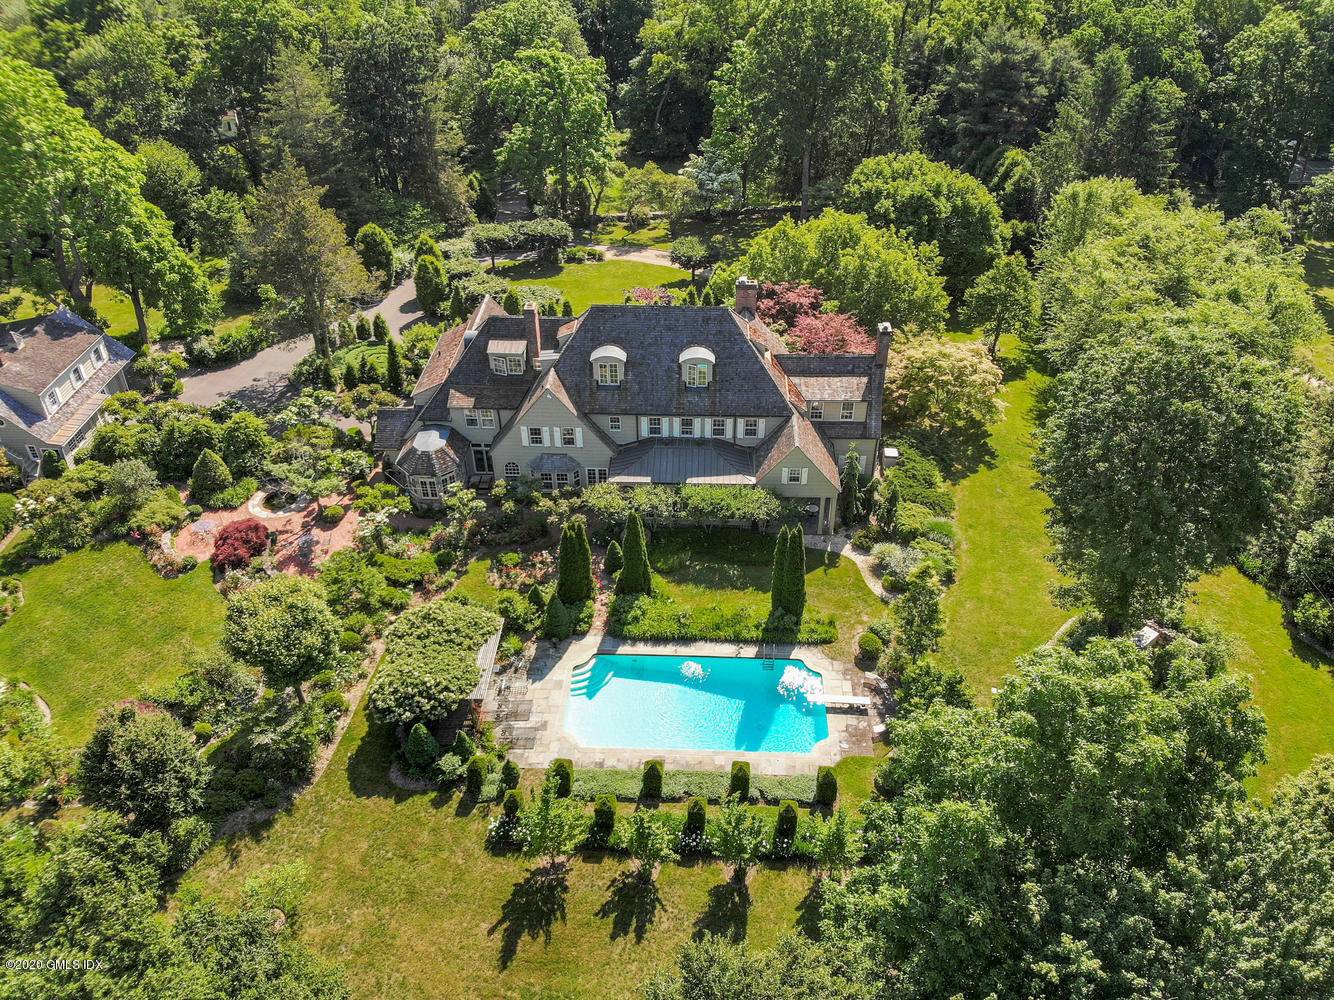 The first time offered for sale since the late 70's and likely the first time on the open market since it was built in 1925, this beautiful country estate with ...